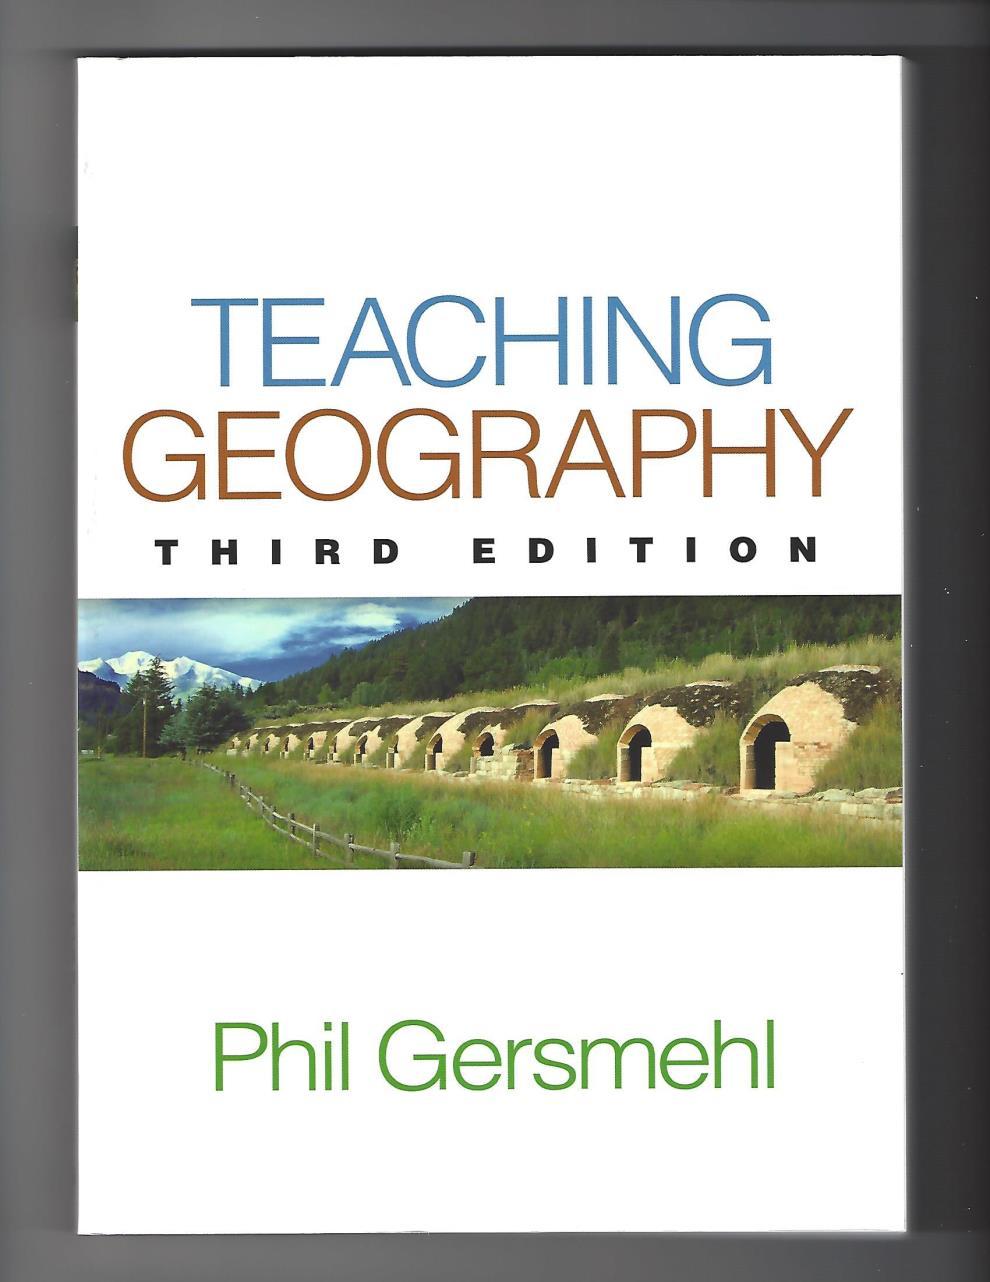 Teaching Geography Author Phil